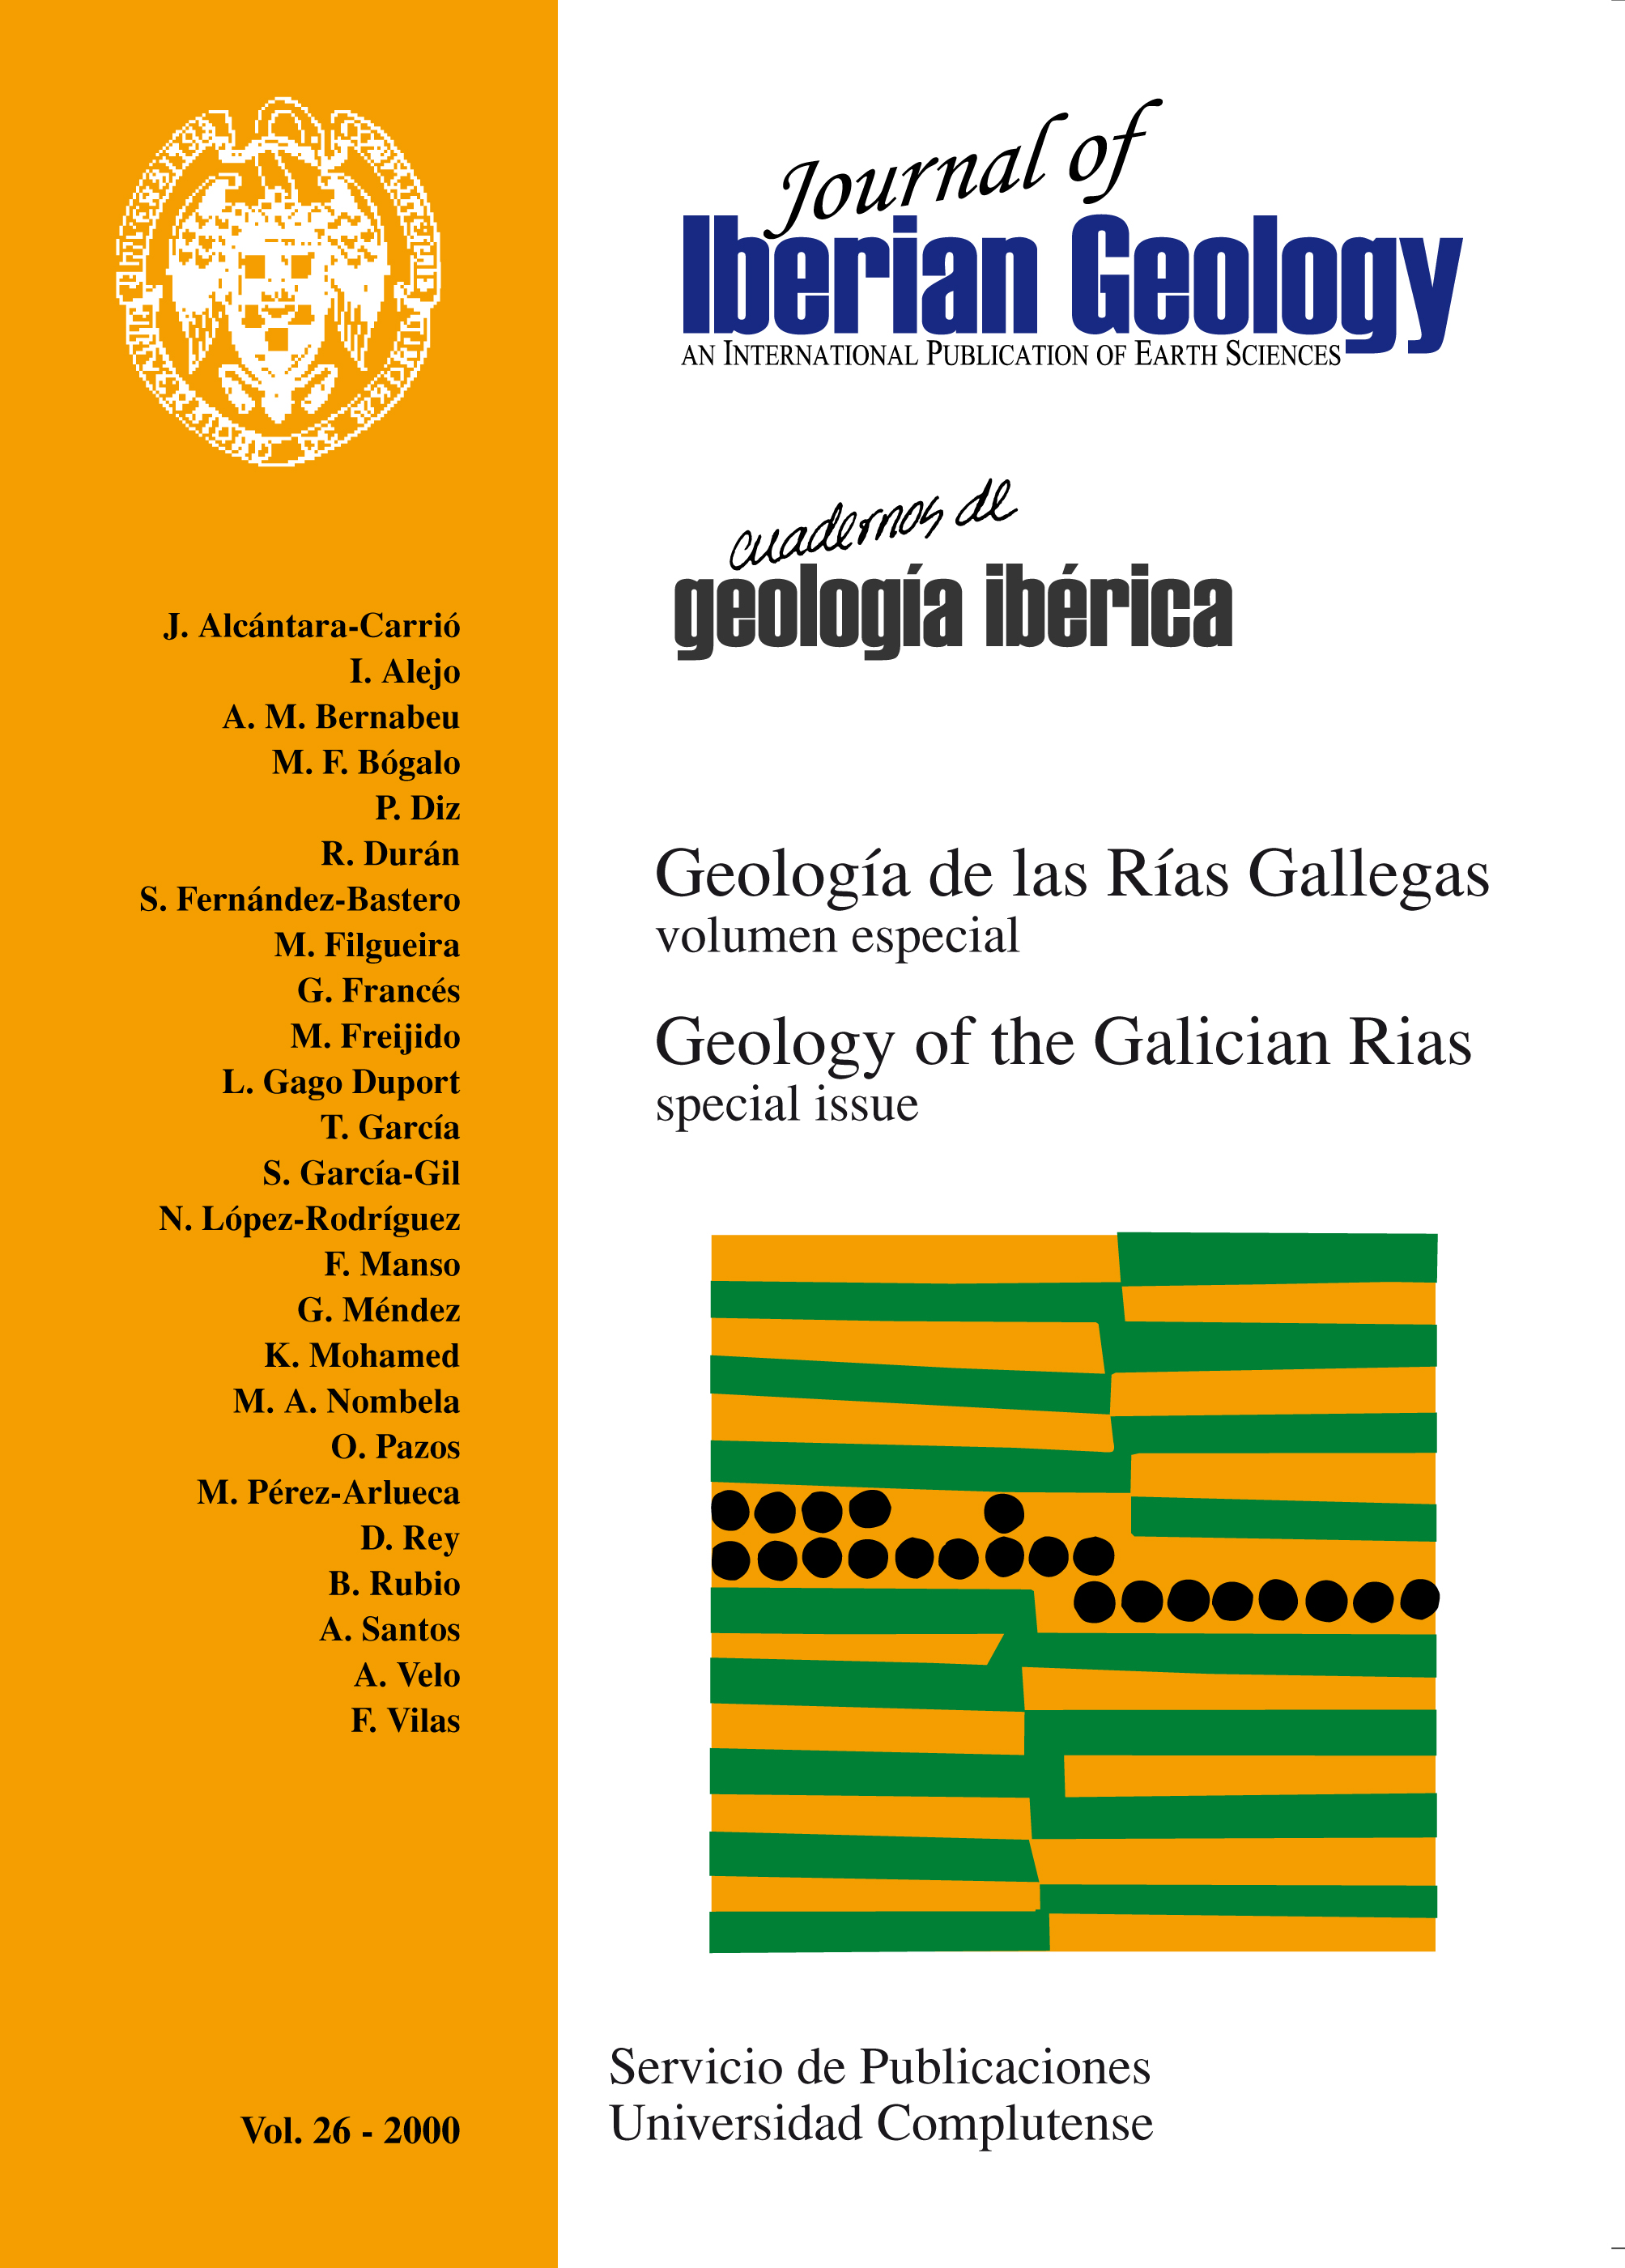 					View Vol. 26 (2000): Geology of the Galician Rias
				